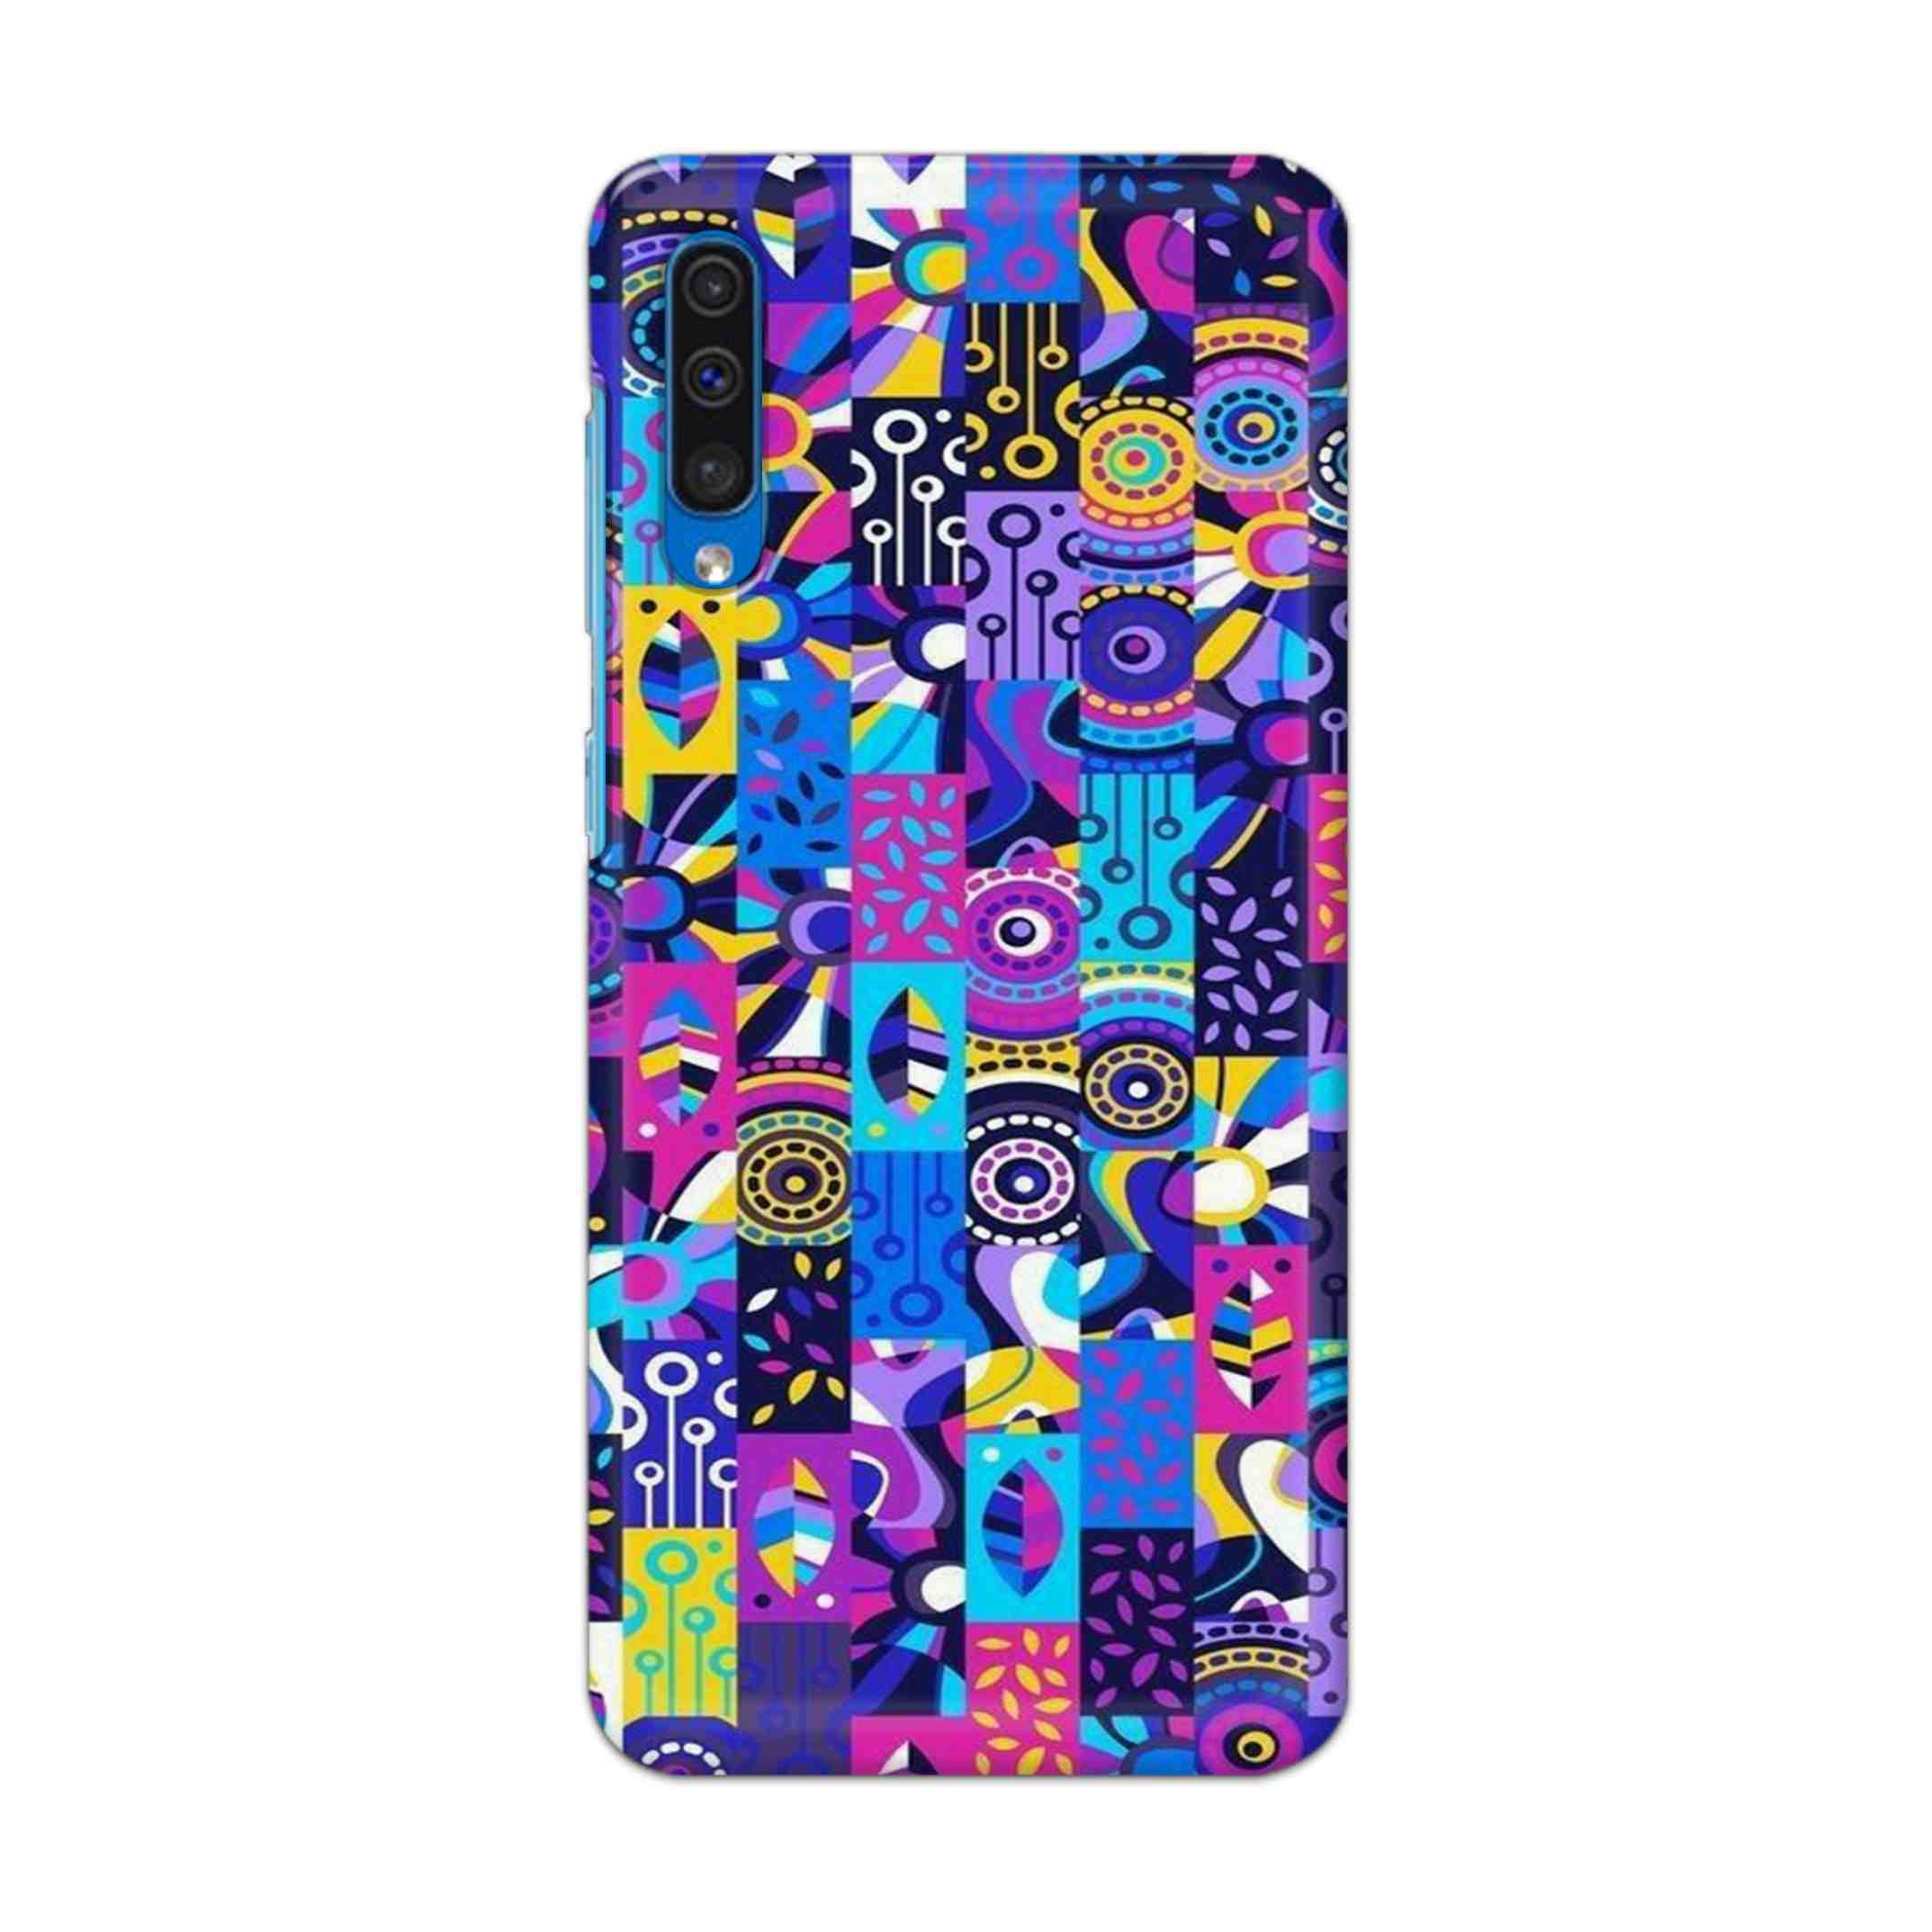 Buy Rainbow Art Hard Back Mobile Phone Case Cover For Samsung Galaxy A50 / A50s / A30s Online